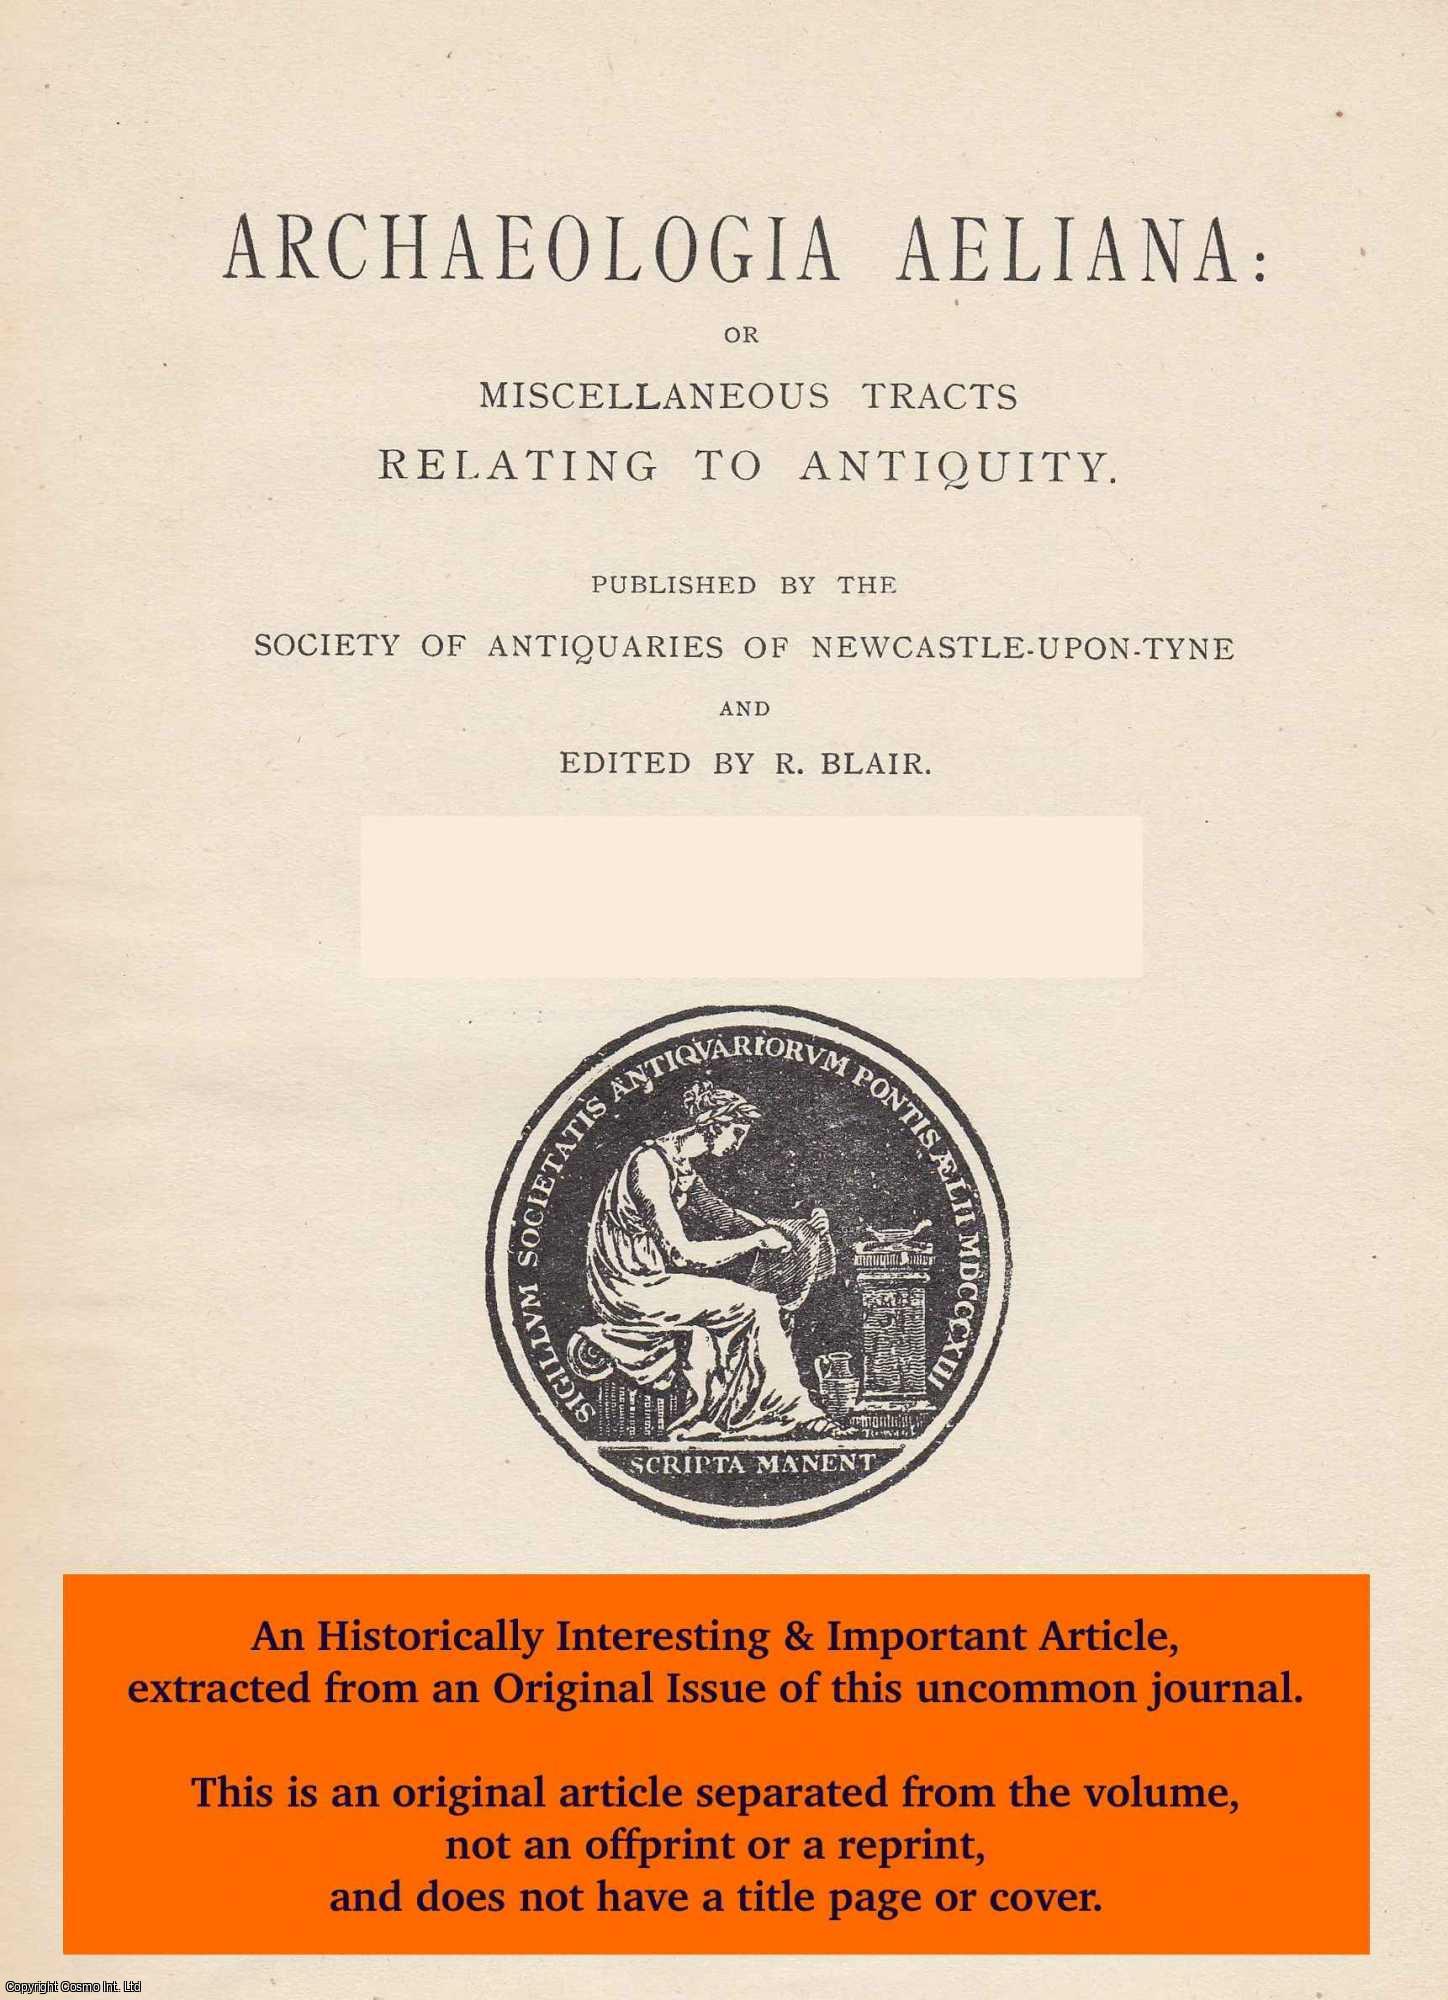 Margaret E. Jones & H. L. Honeyman, Margaret E. - Thomas Oliver and His Plans for Central Newcastle. An original article from The Archaeologia Aeliana: or Miscellaneous Tracts Relating to Antiquity, 1951.